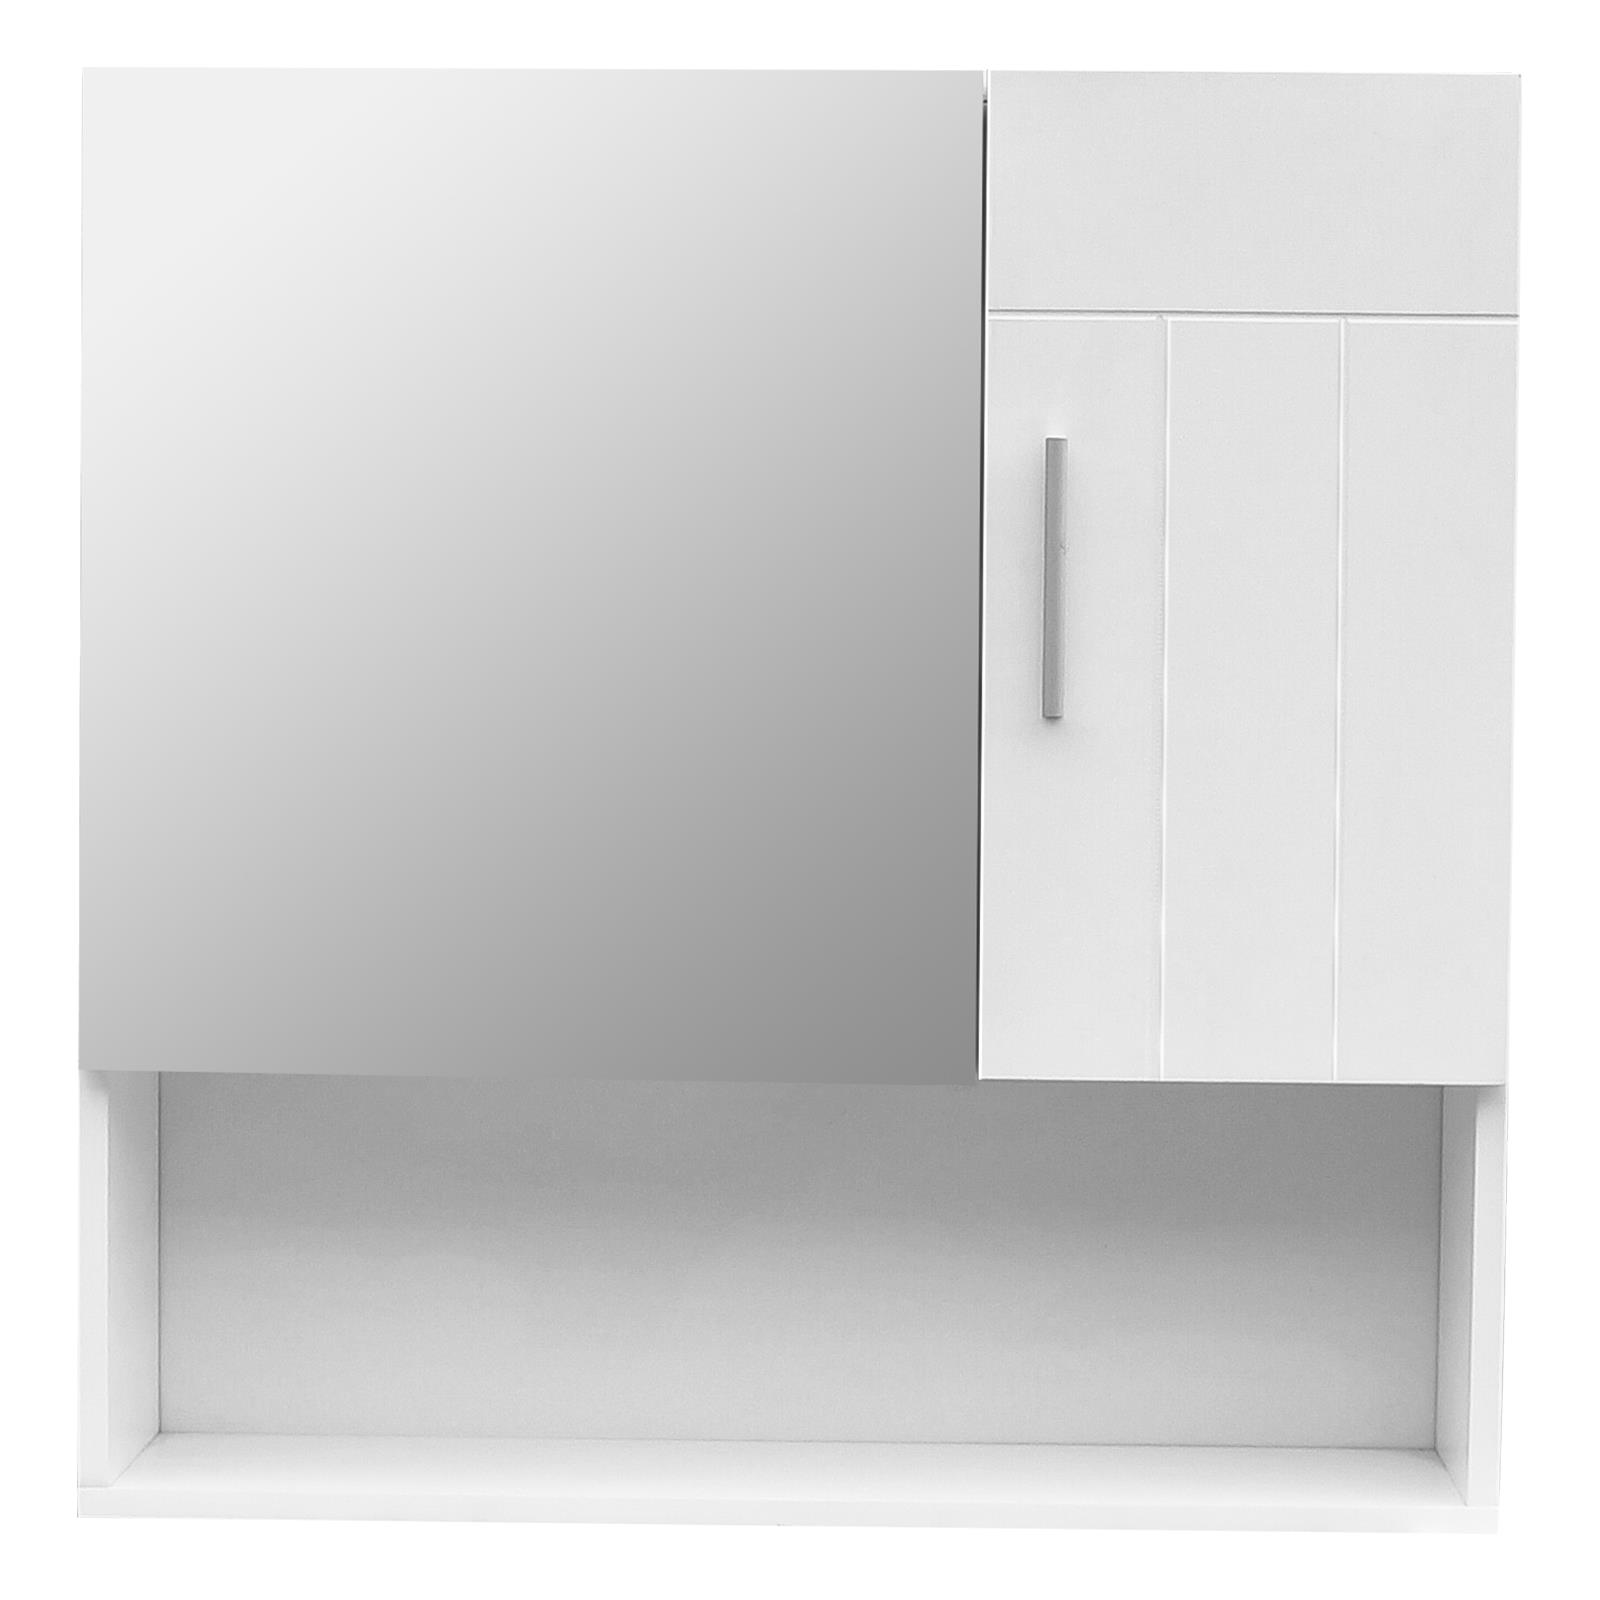 GoDecor Wall Storage Cabinet with mirror Doors and Shelf, Mirrored Wall Mounted Medicine Cabinet for Bathroom, White - image 5 of 5